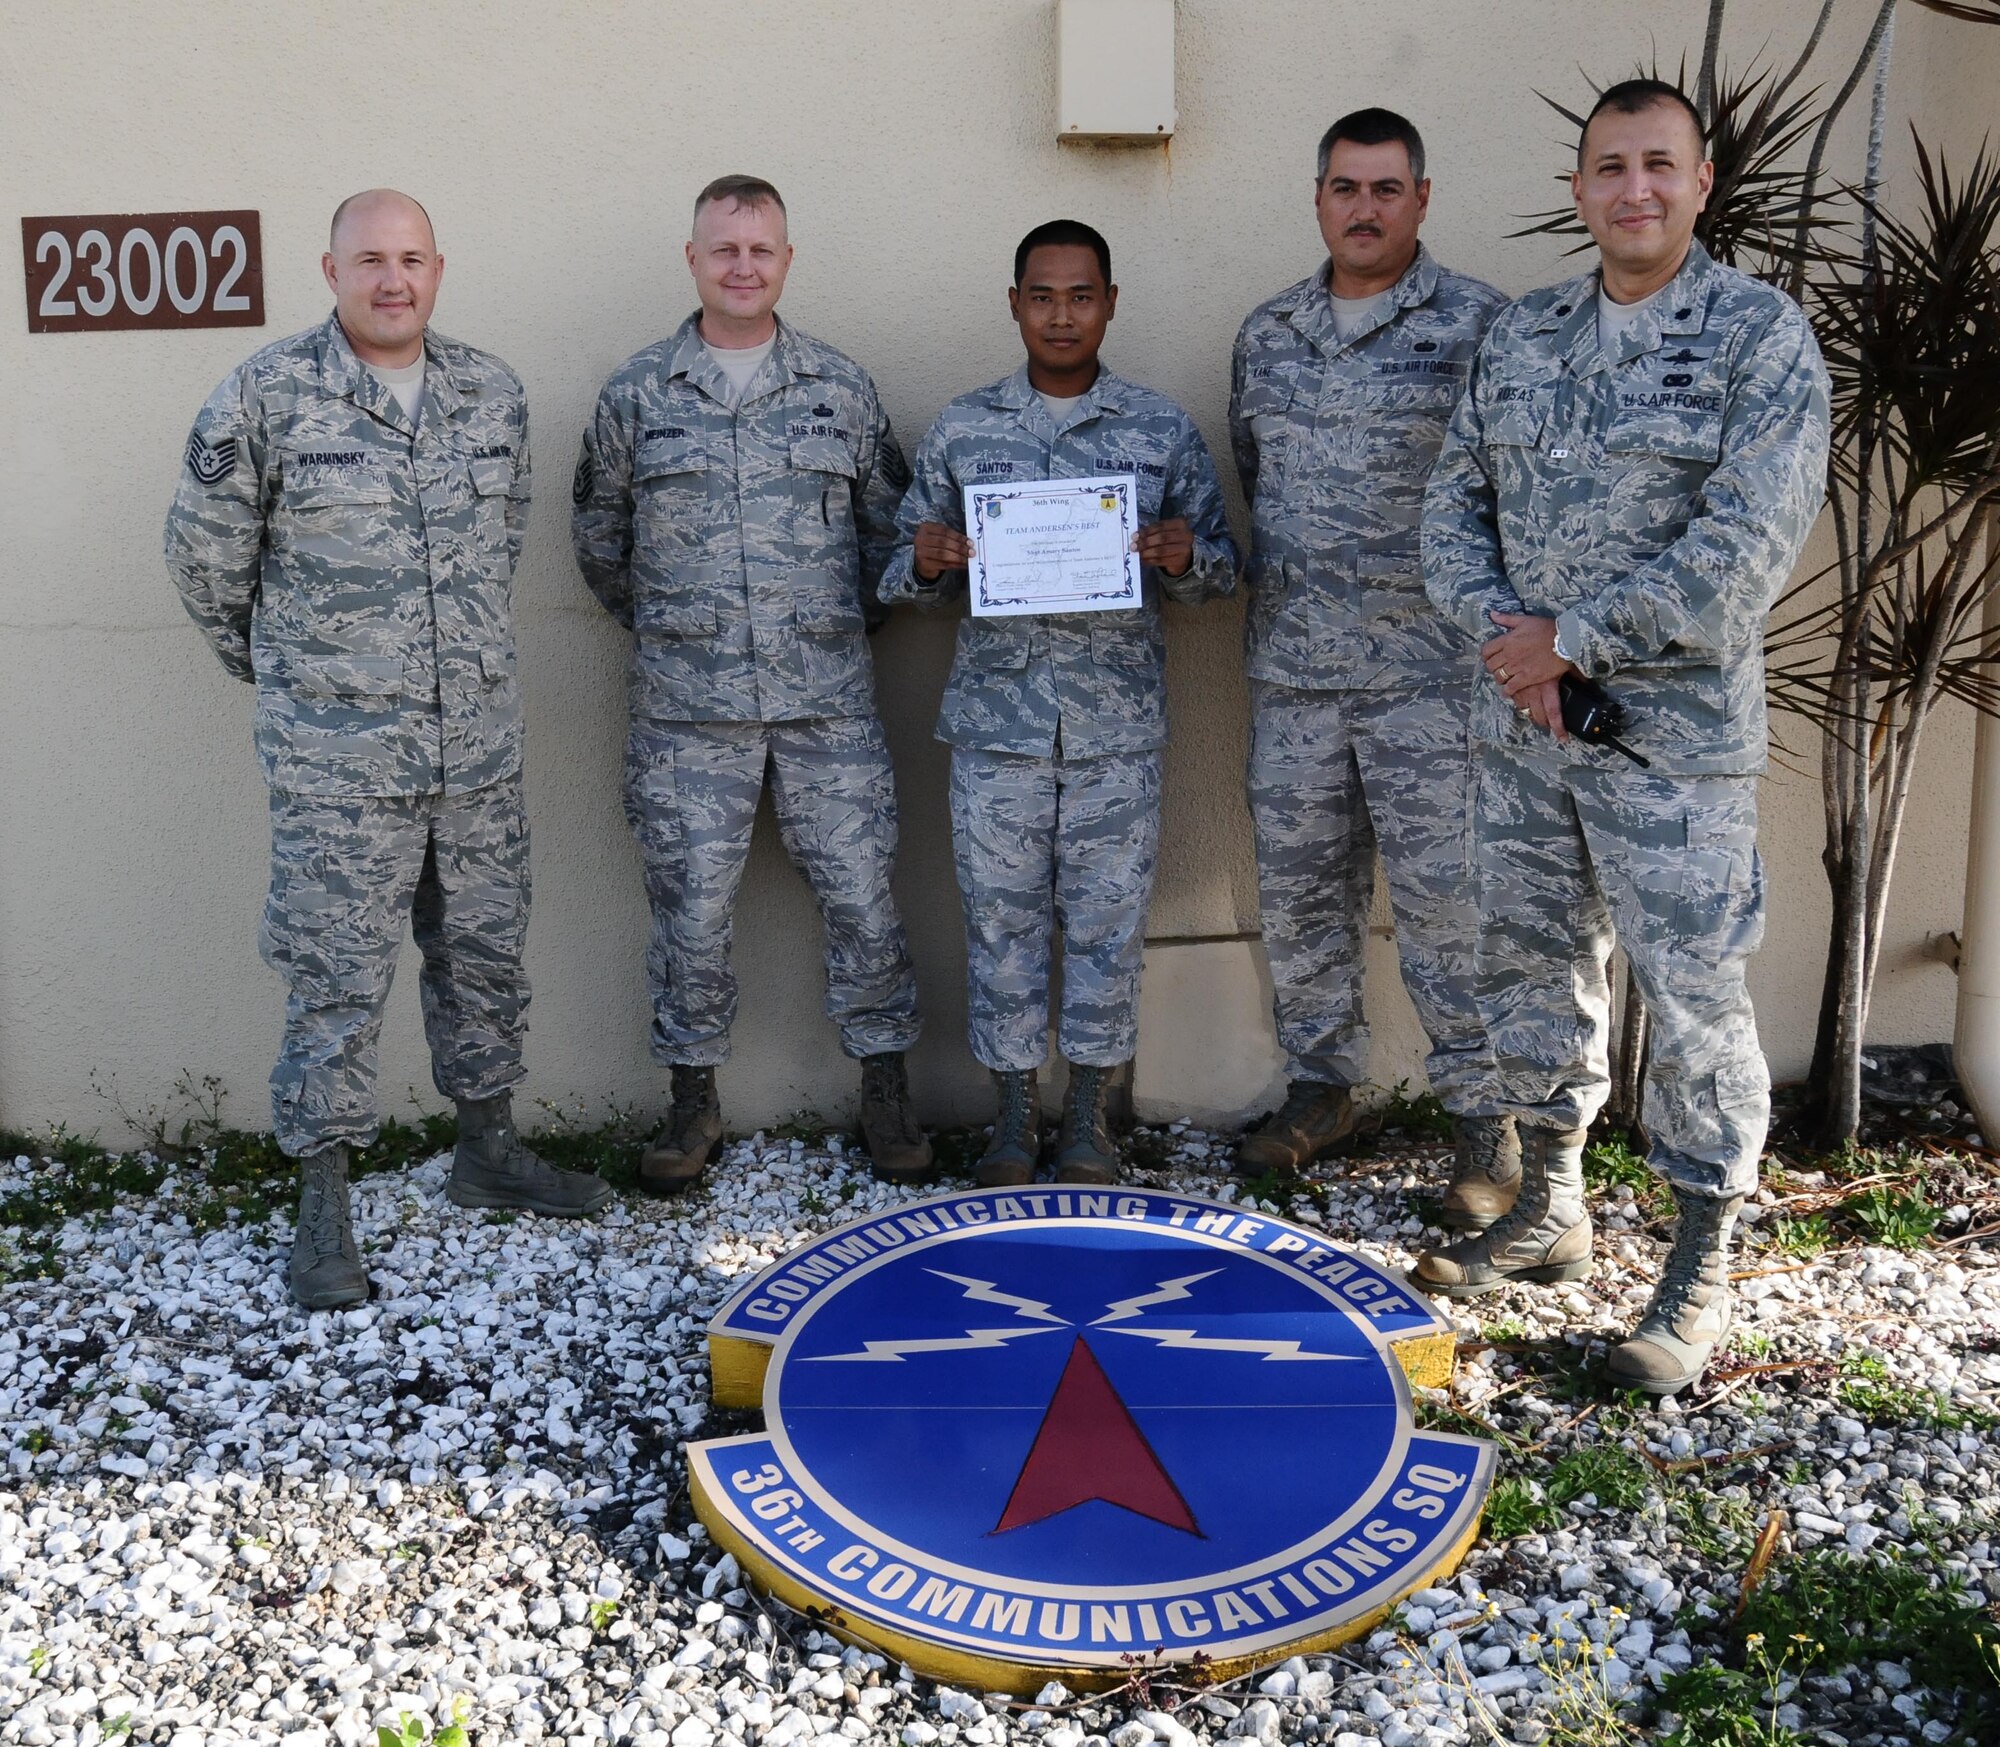 ANDERSEN AIR FORCE BASE, Guam-- Staff Sgt. Amory Santos, 36th Communications Squadron quality assurance evaluator, was awarded Team Andersen’s Best here Oct. 25. Team Andersen's Best is a recognition program which highlights a top performer from the 36th Wing. Each week, supervisors nominate a member of their team for outstanding performance and the wing commander presents the selected Airman or civilian with an award. To nominate your Airman or civilian for Team Andersen's Best, contact your unit chief or superintendent explaining their accomplishments.(U.S. Air Force photo by Airman 1st Class Mariah Haddenham/Released)